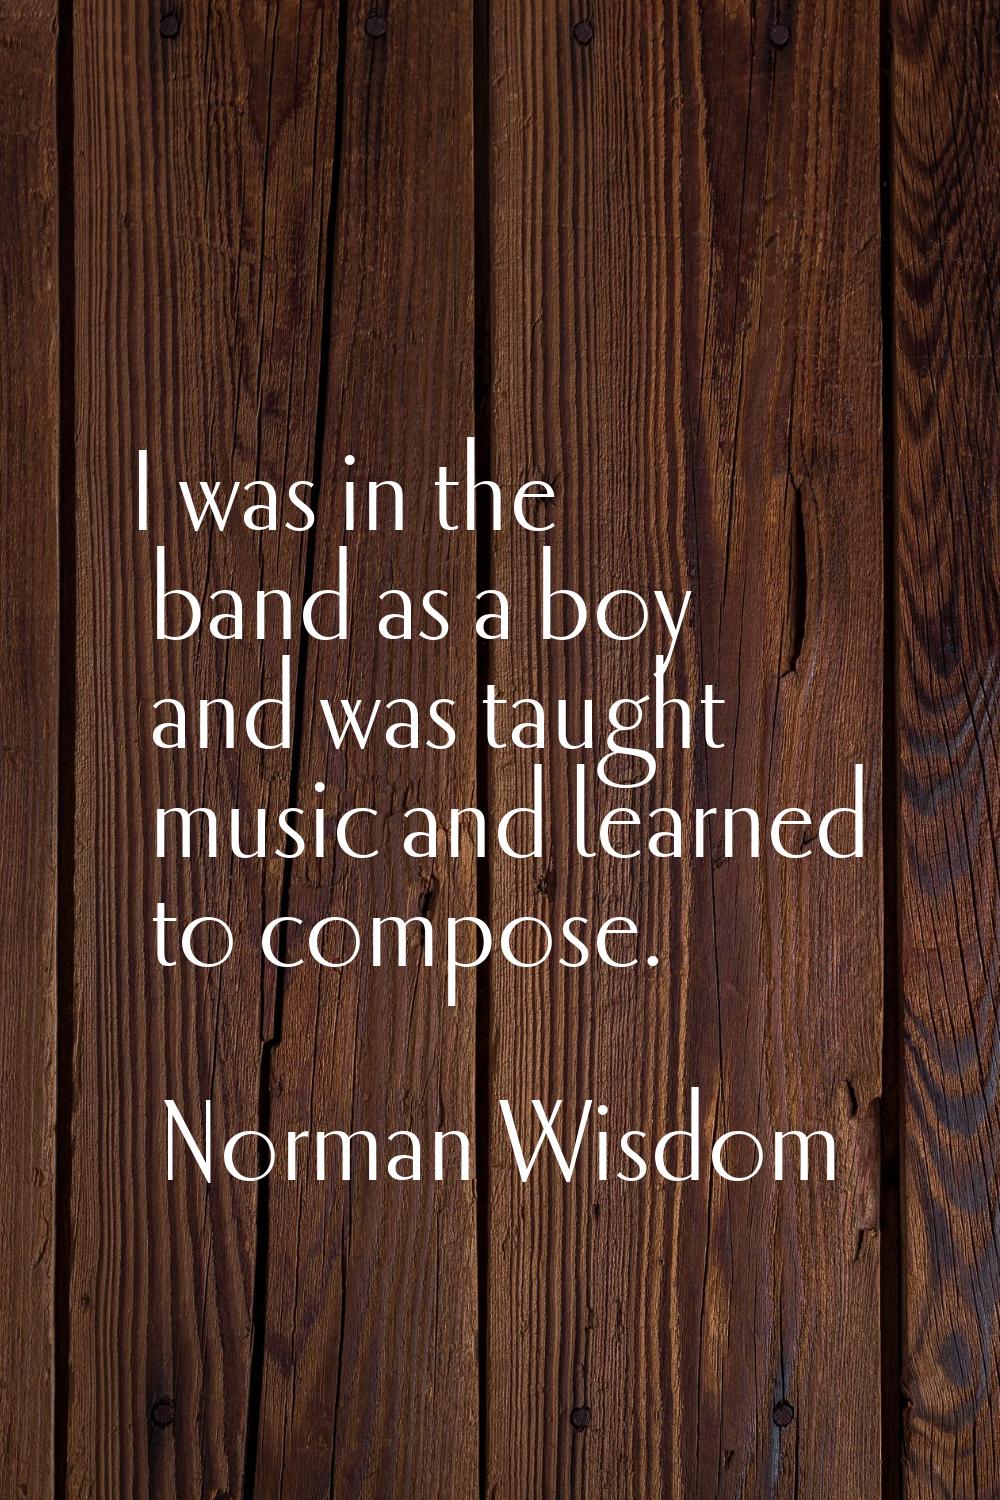 I was in the band as a boy and was taught music and learned to compose.